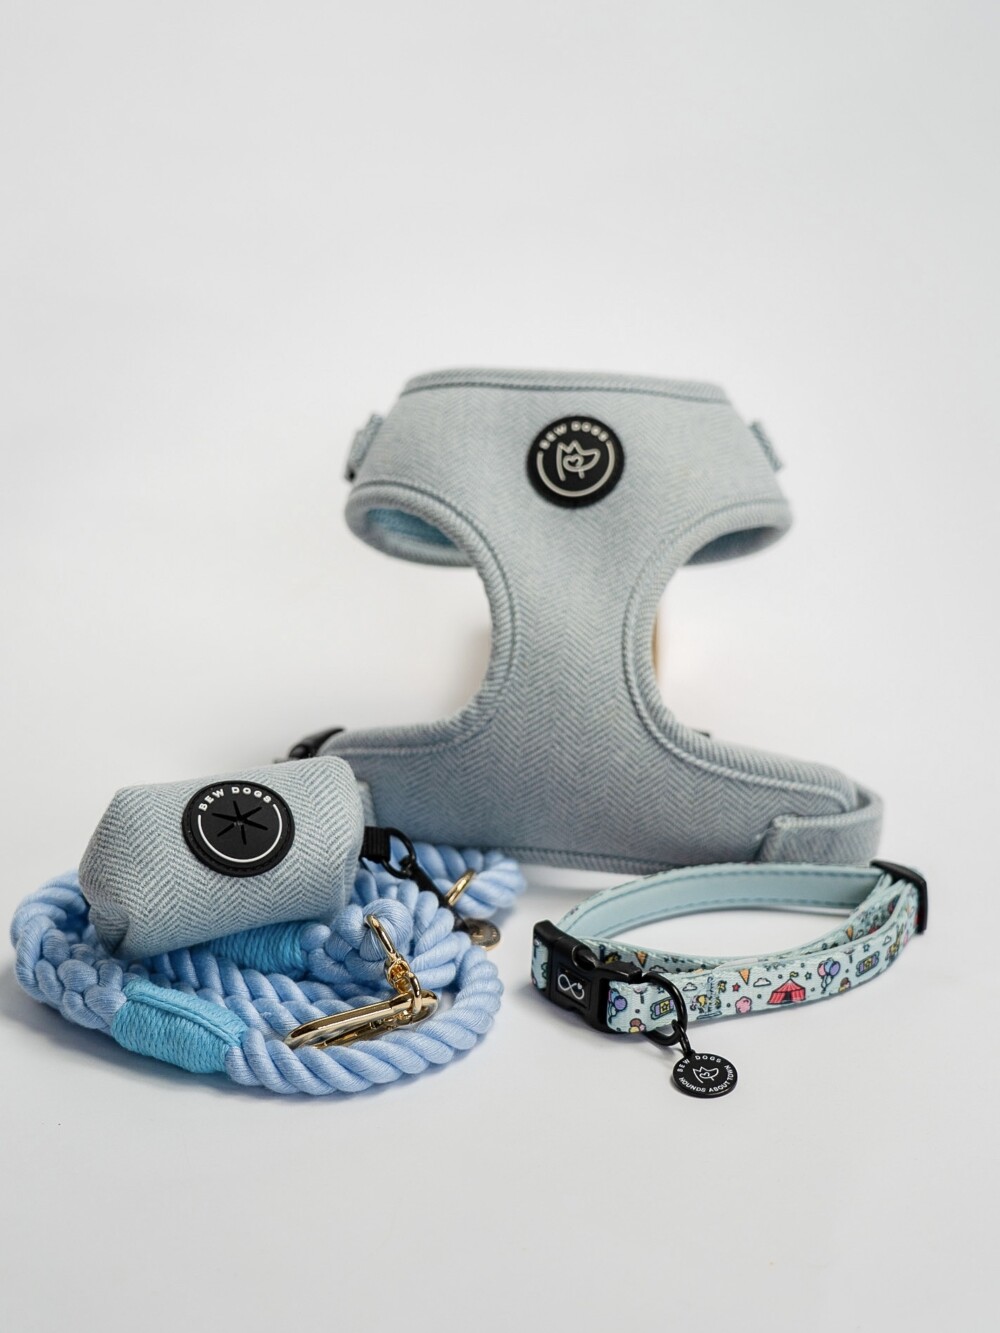 A sky blue herringbone harness, matching poop bag holder and rope lead plus a blue/green collar, against a white background.